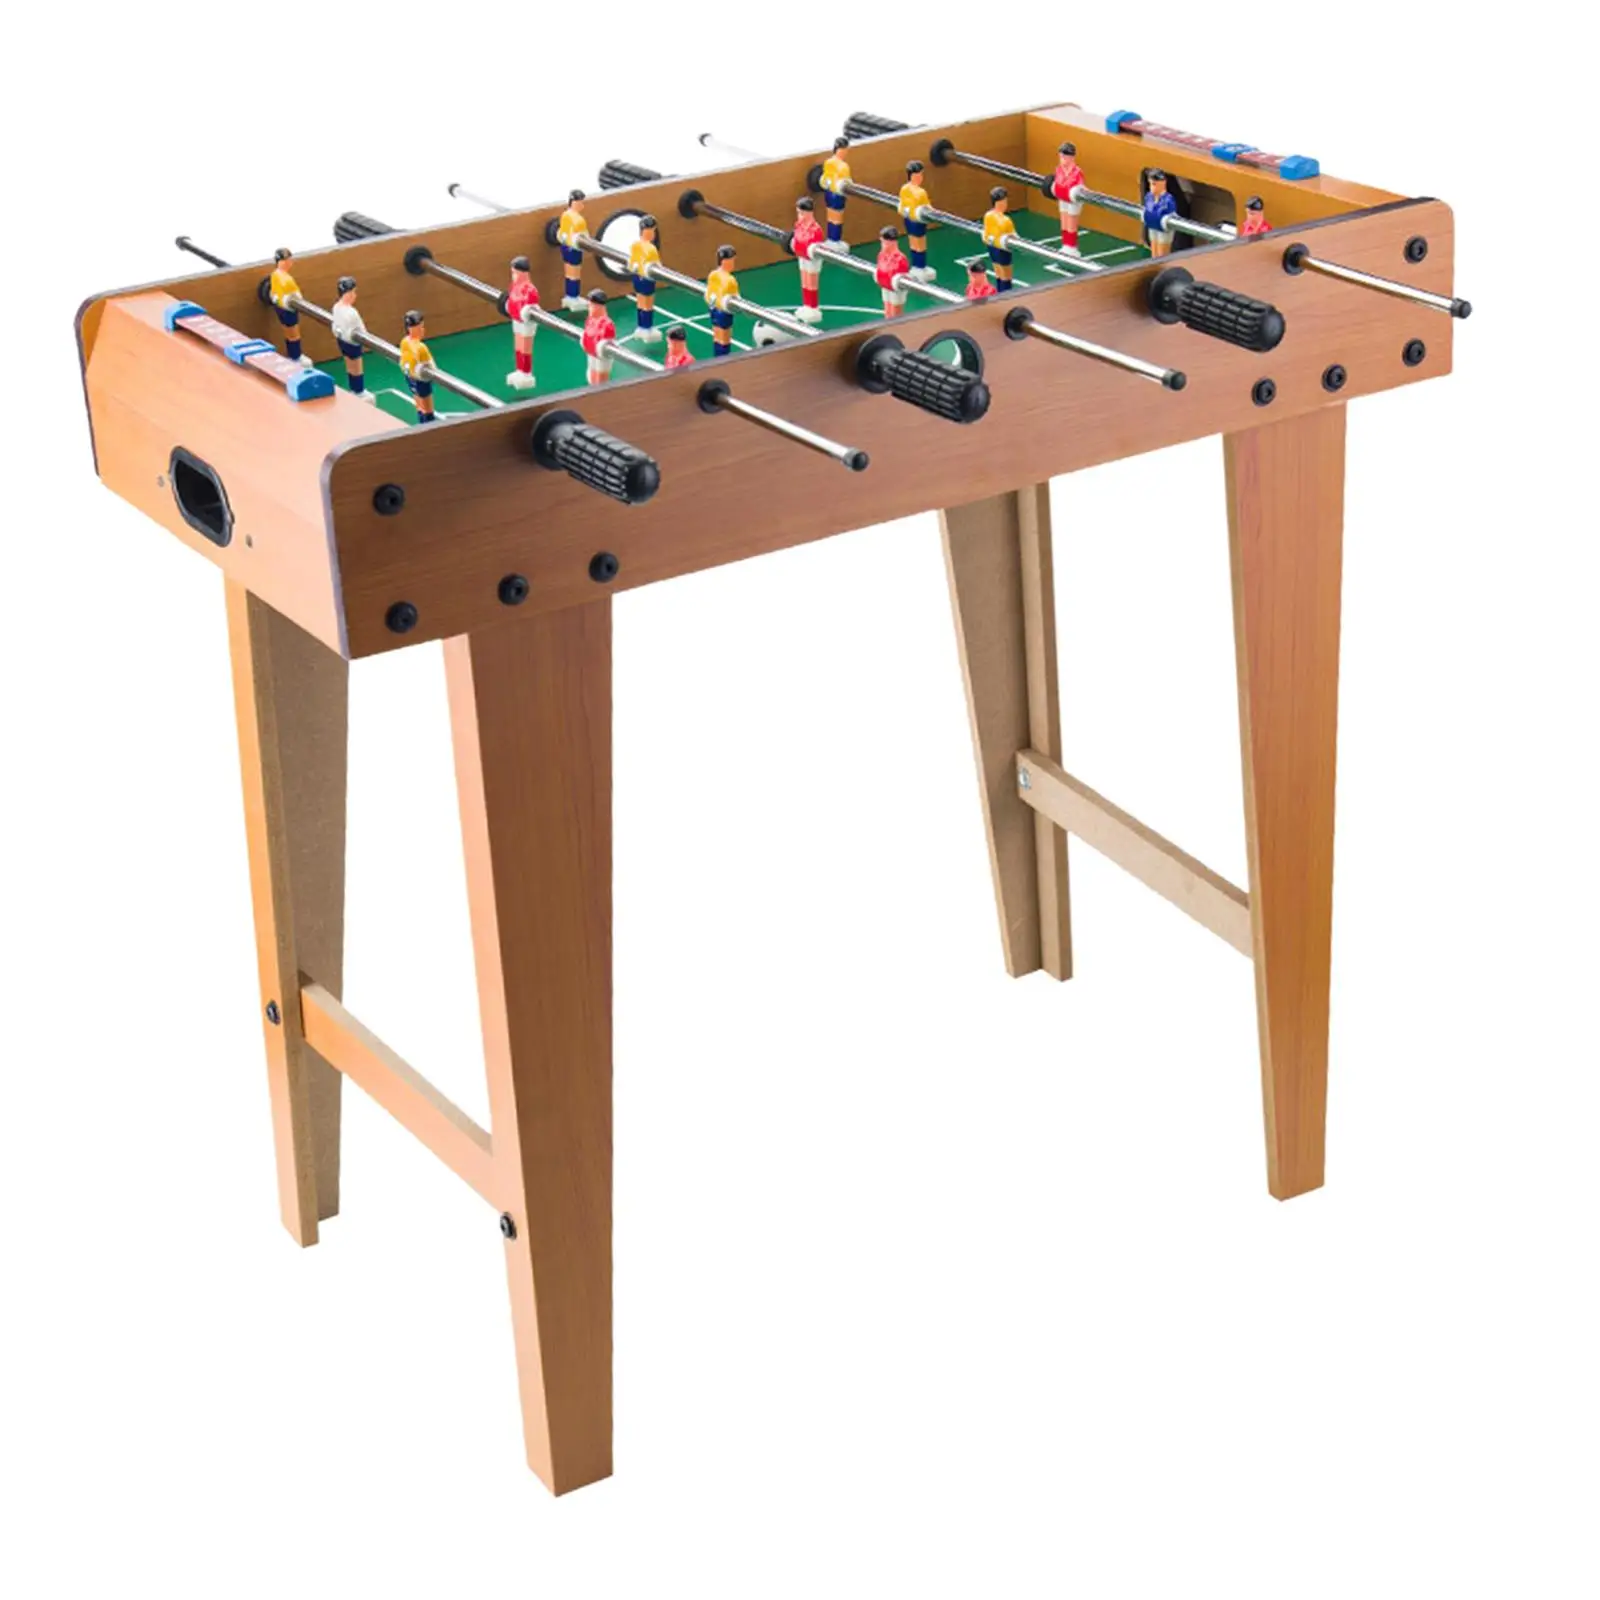 Wooden Foosball Table Tabletop Soccer Game Parent Child Interactive Toy with